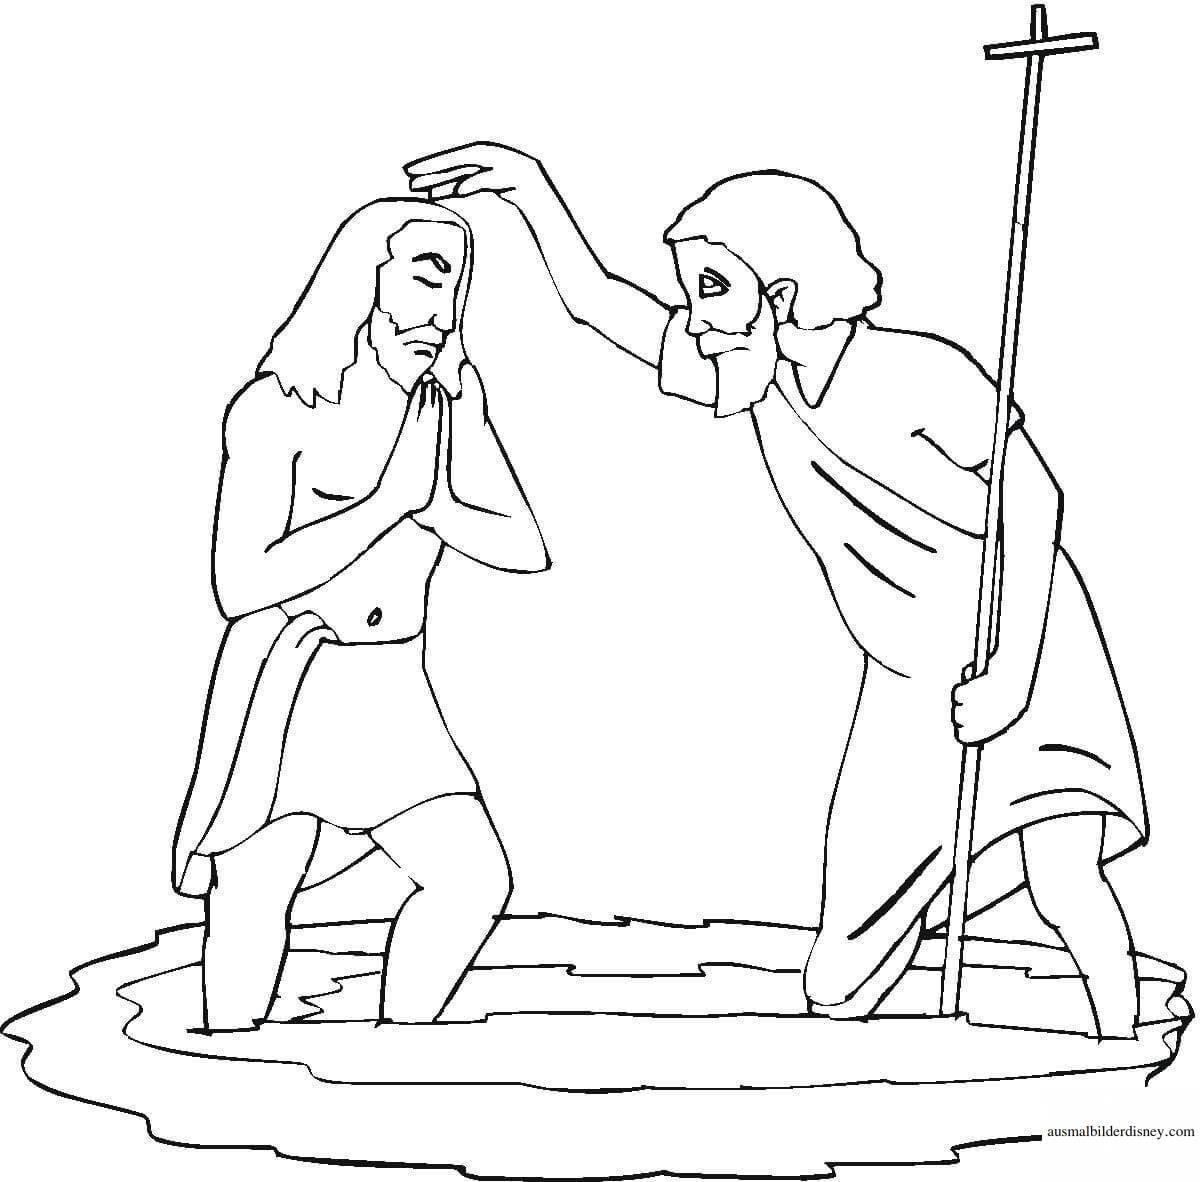 Fantastic coloring book baptism of the Lord for children